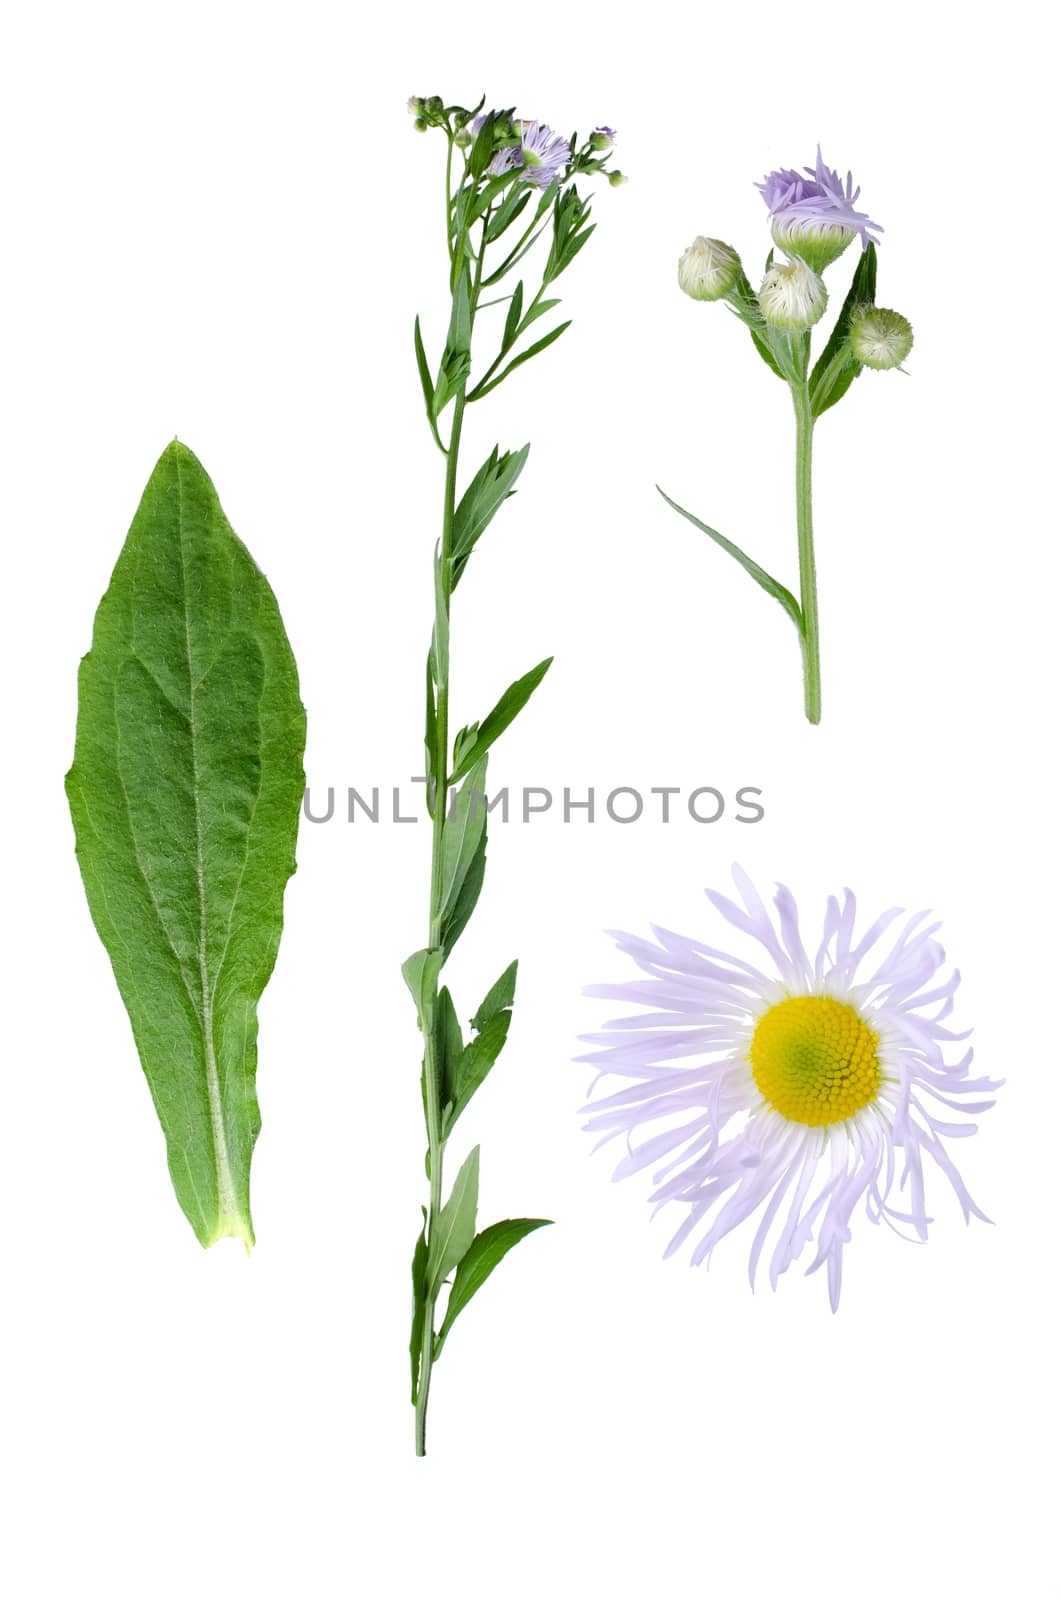 Erigeron annuus with details of leaf and bloom isolated on white background